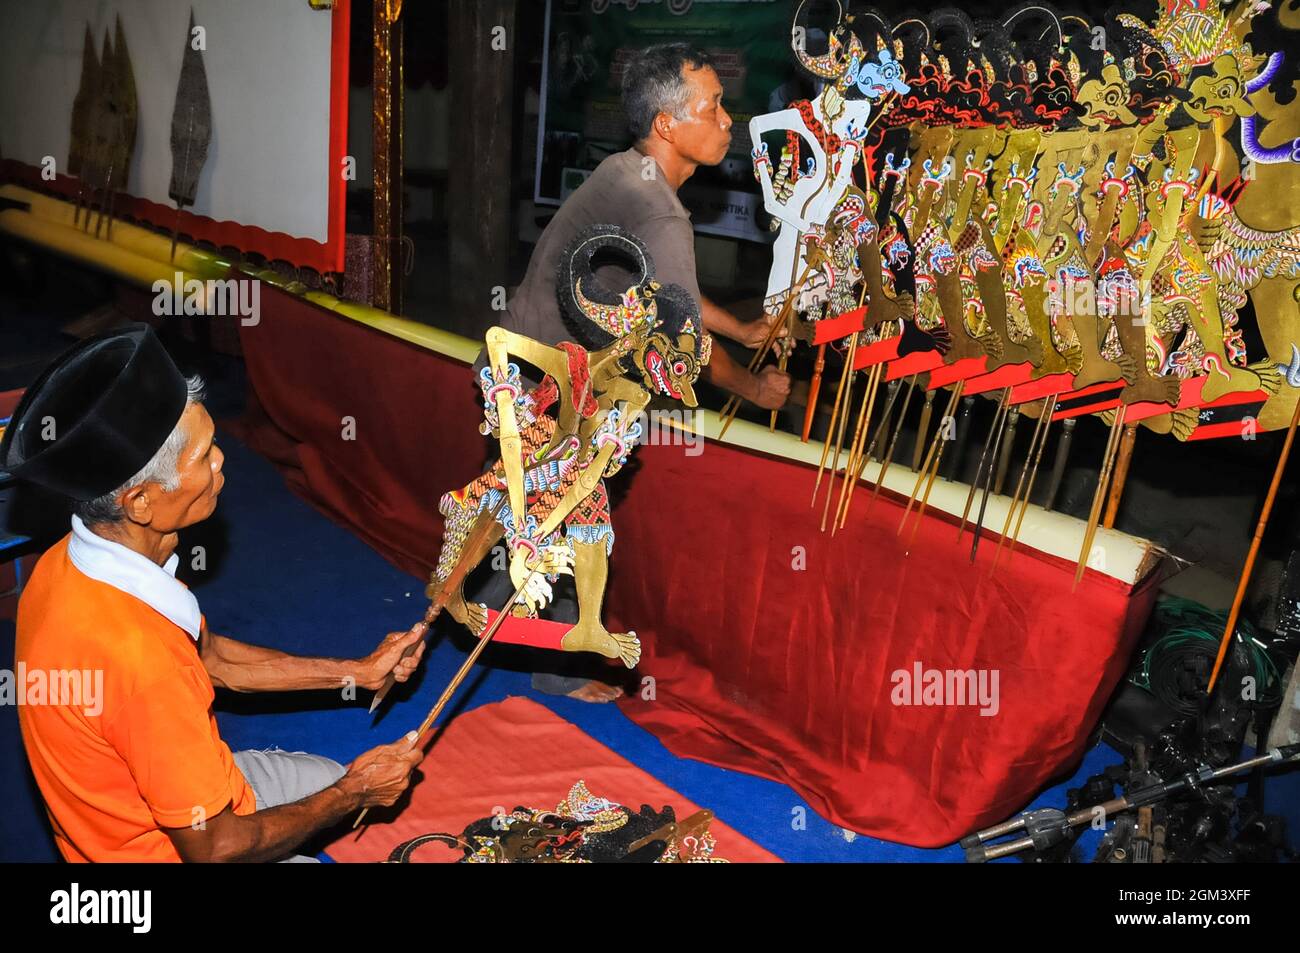 Two men are arranging puppets or wayang kulit in preparation for a shadow puppet performance. Stock Photo